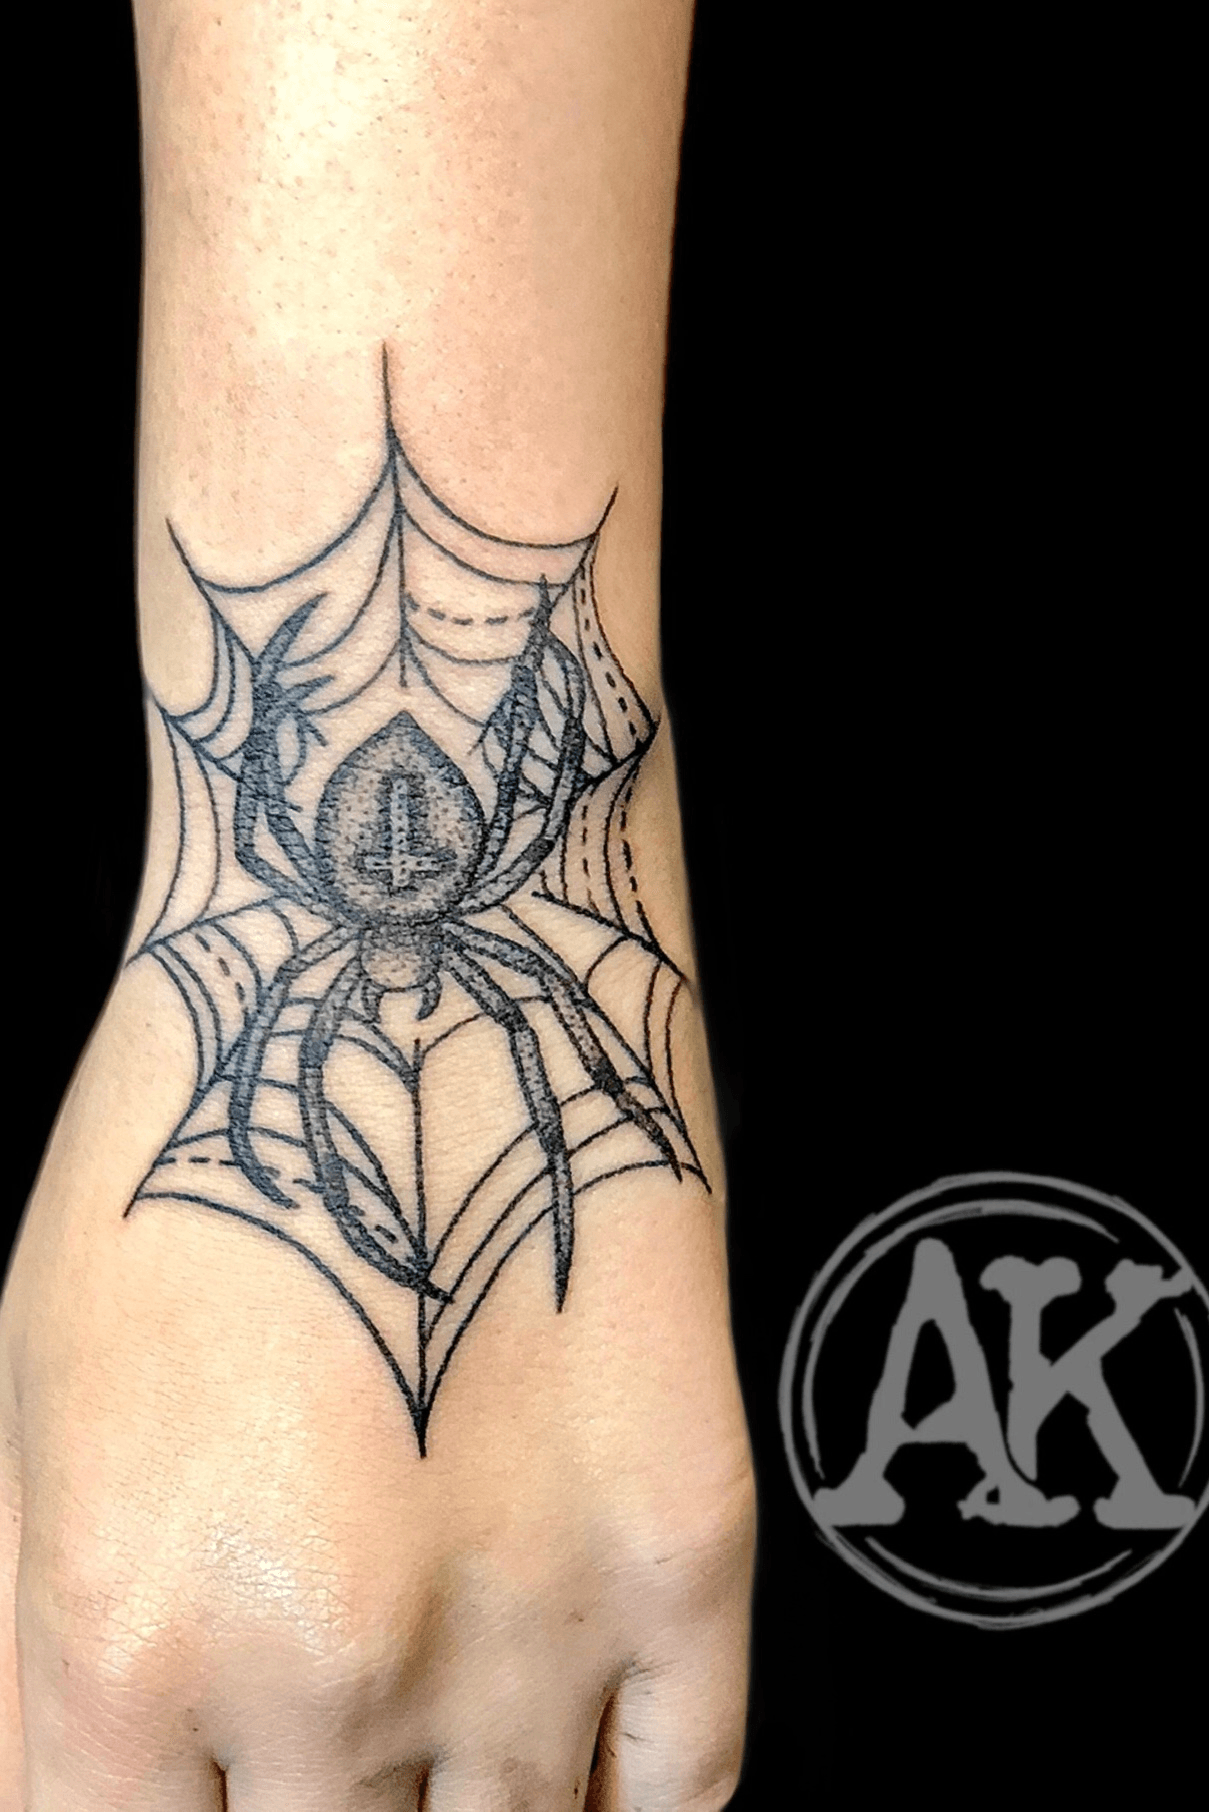 Spider tattoo cover up  Cover tattoo Tattoo coverup Spider tattoo